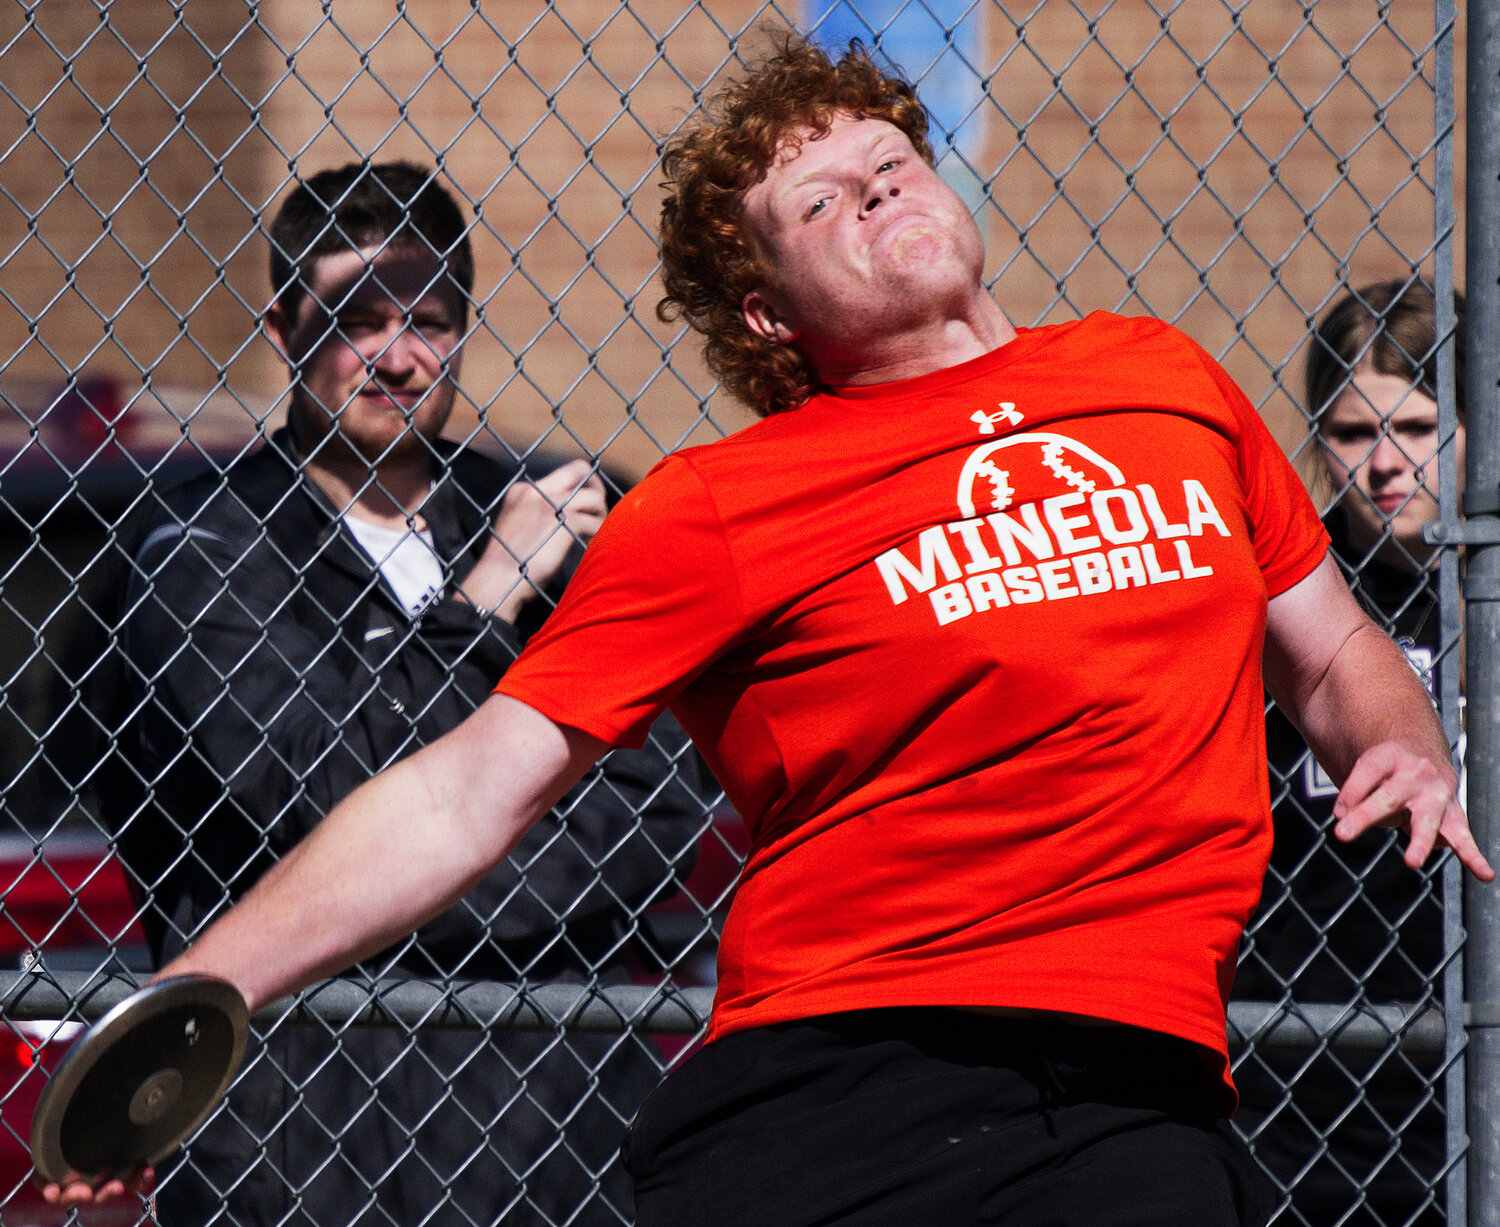 Trey Rushing's discus throw of 126'8" earned a silver medal for Mineola. [see more speed and strength on display]